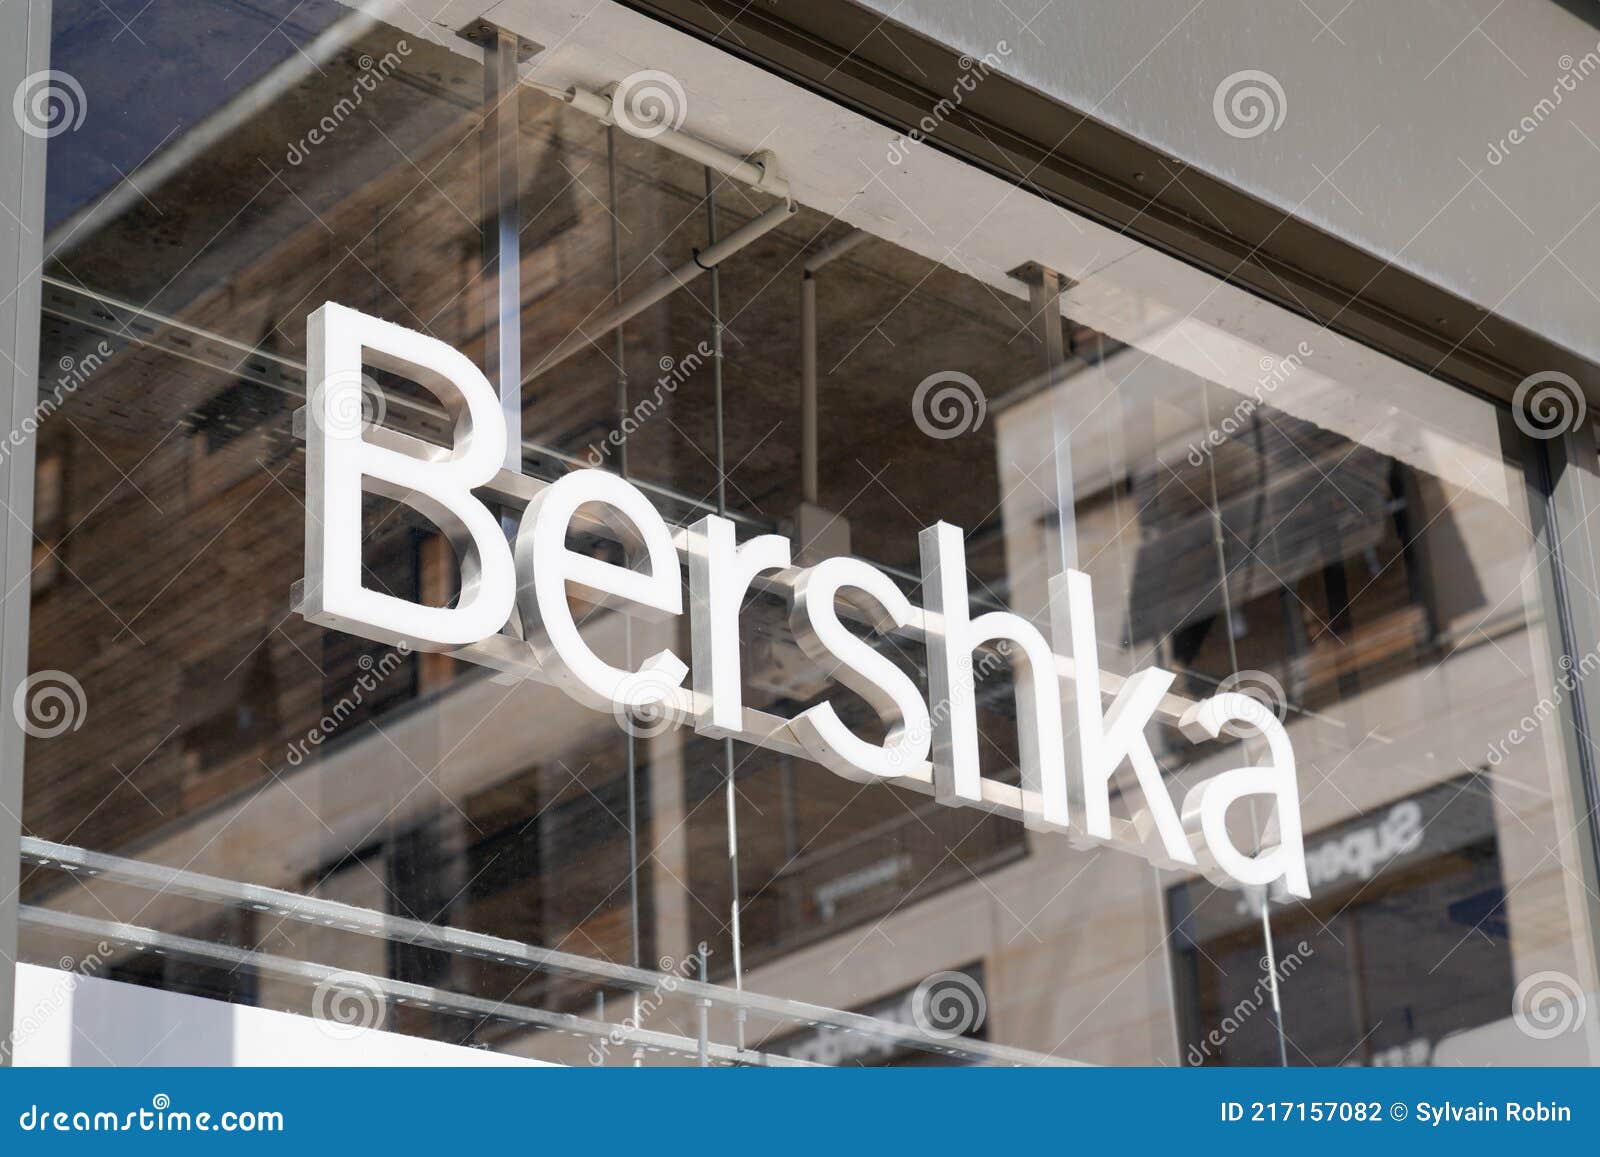 Bershka Logo Brand and Sign Text Front of Windows Trendy Boutique ...